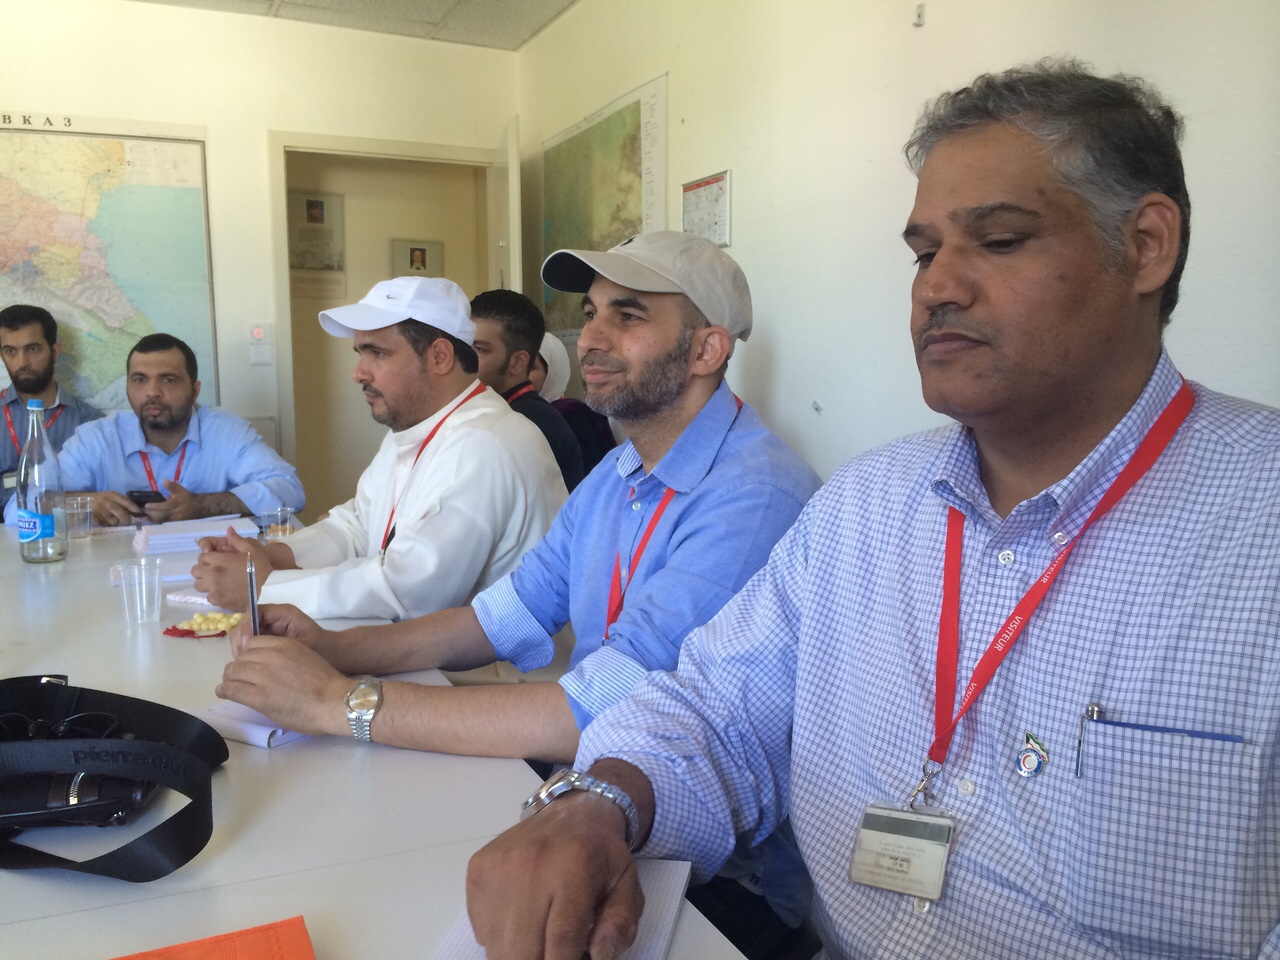 The Second Kuwait International Forum for Humanitarian Workers delegation's visit to the International Committee of the Red Cross (ICRC) in Geneva